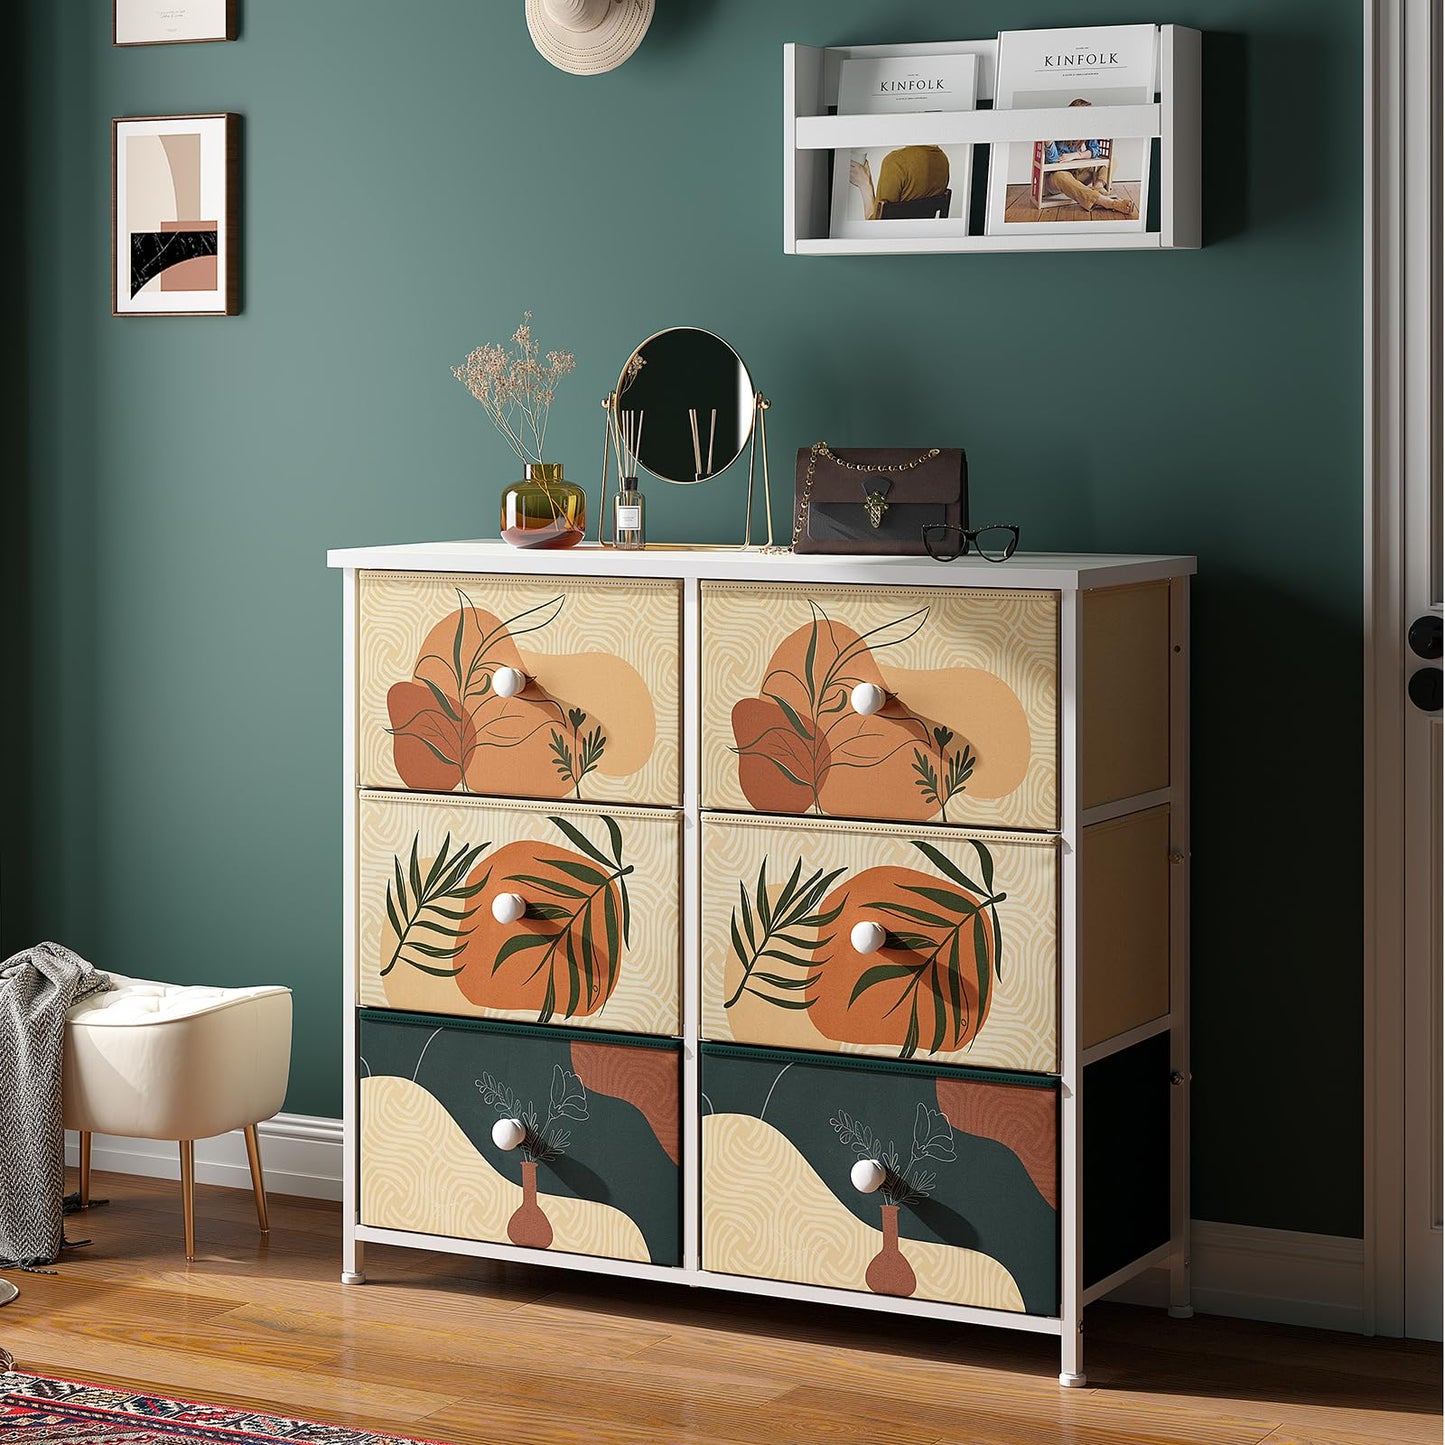 Hana Exports Dresser, Dresser for Bedroom with 9 Drawers, Large Dressers & Chest of Drawers Fabric Dresser for Bedroom Boho Storage Drawers Dressers for Closet, Kids, Wooden Top, Printed